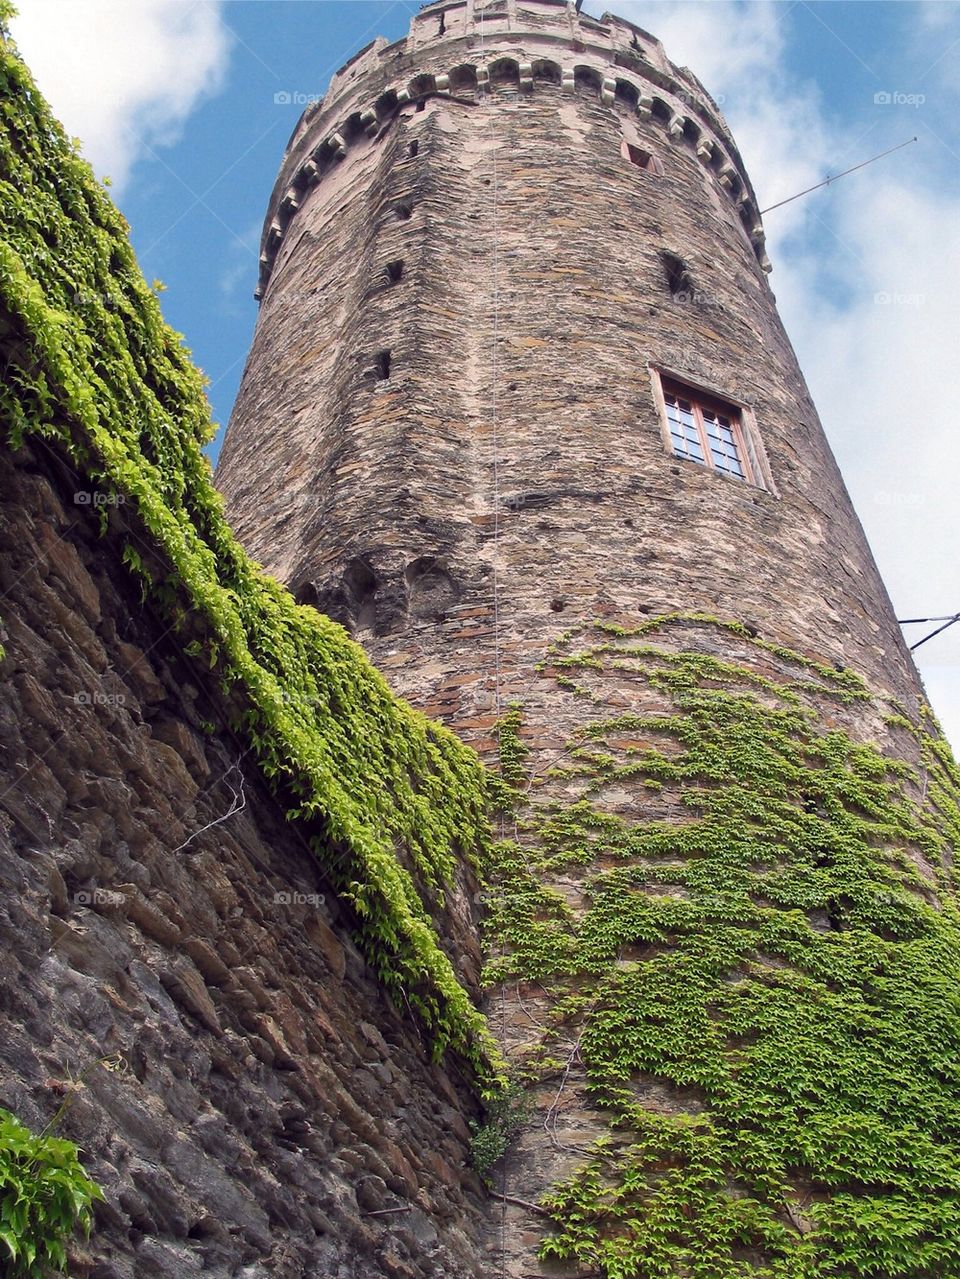 Ivy tower